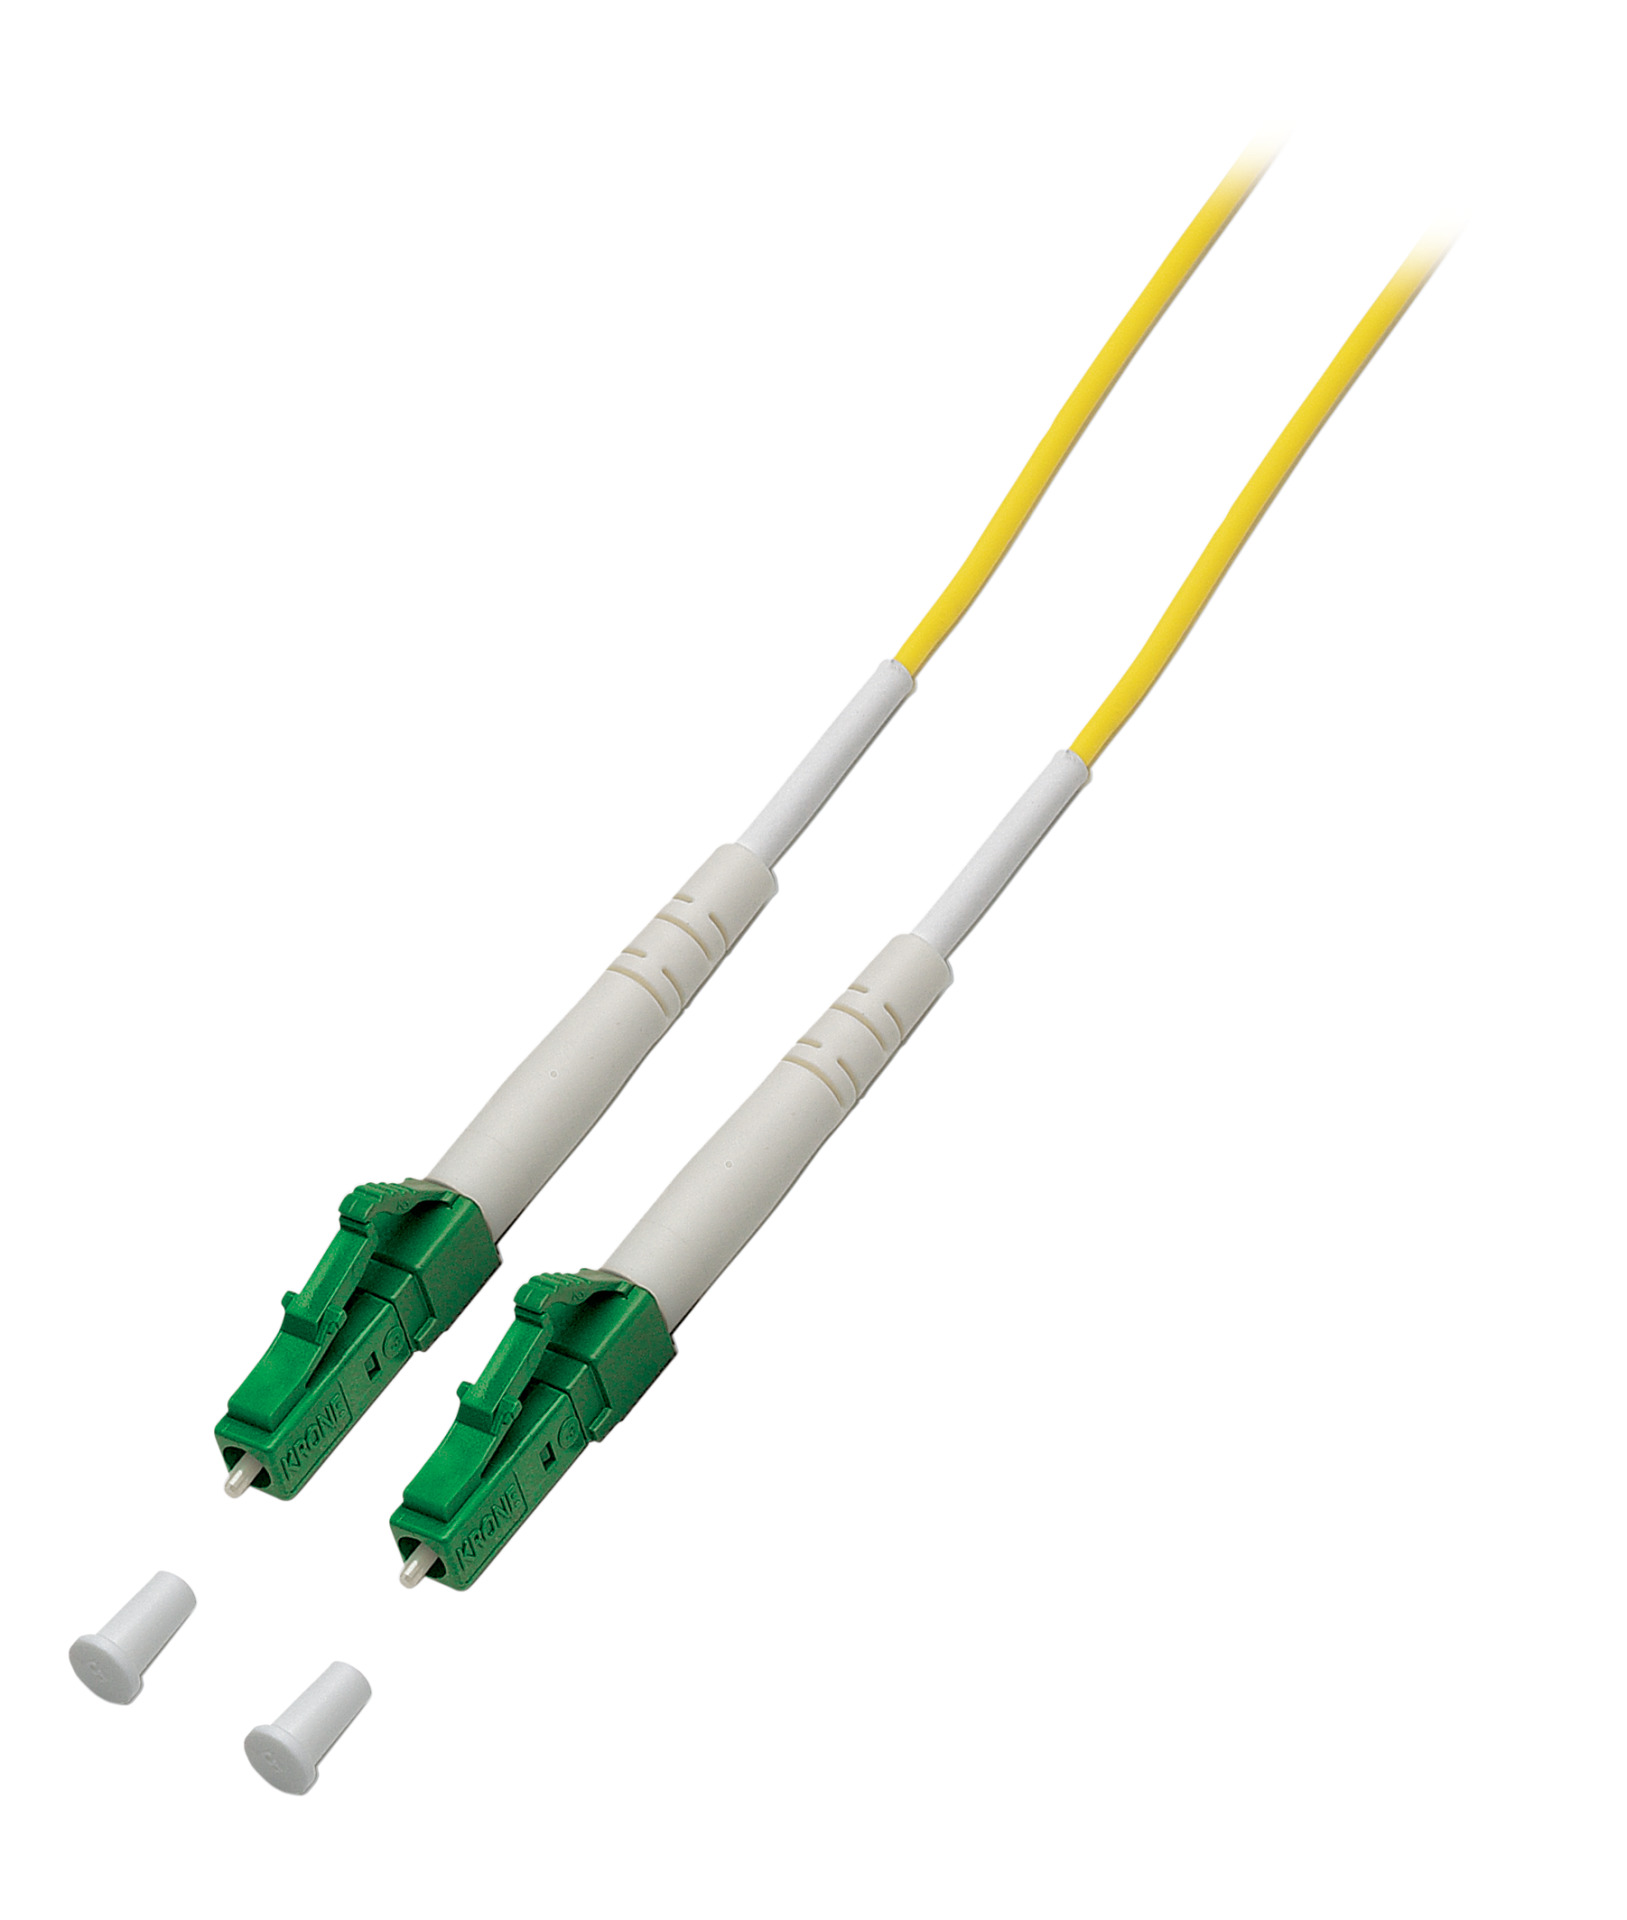 Simplex FO Patch Cable LC/APC-LC/APC G657.A2 5m, 2,0mm yellow 9/125µm